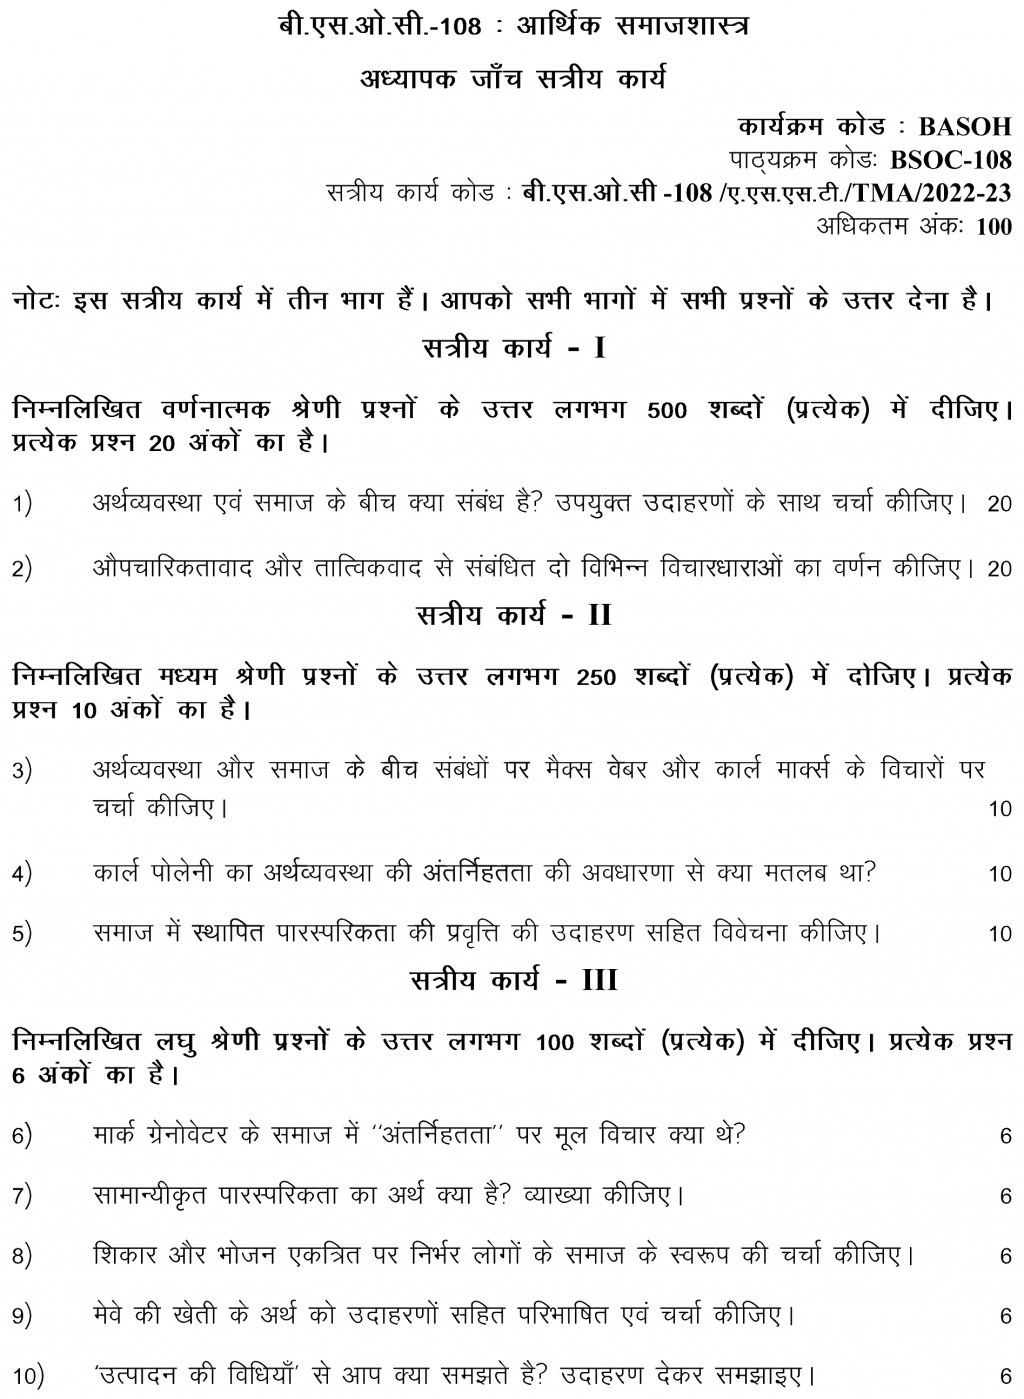 IGNOU BSOC-108 - Economic Sociology, Latest Solved Assignment-July 2022 – January 2023